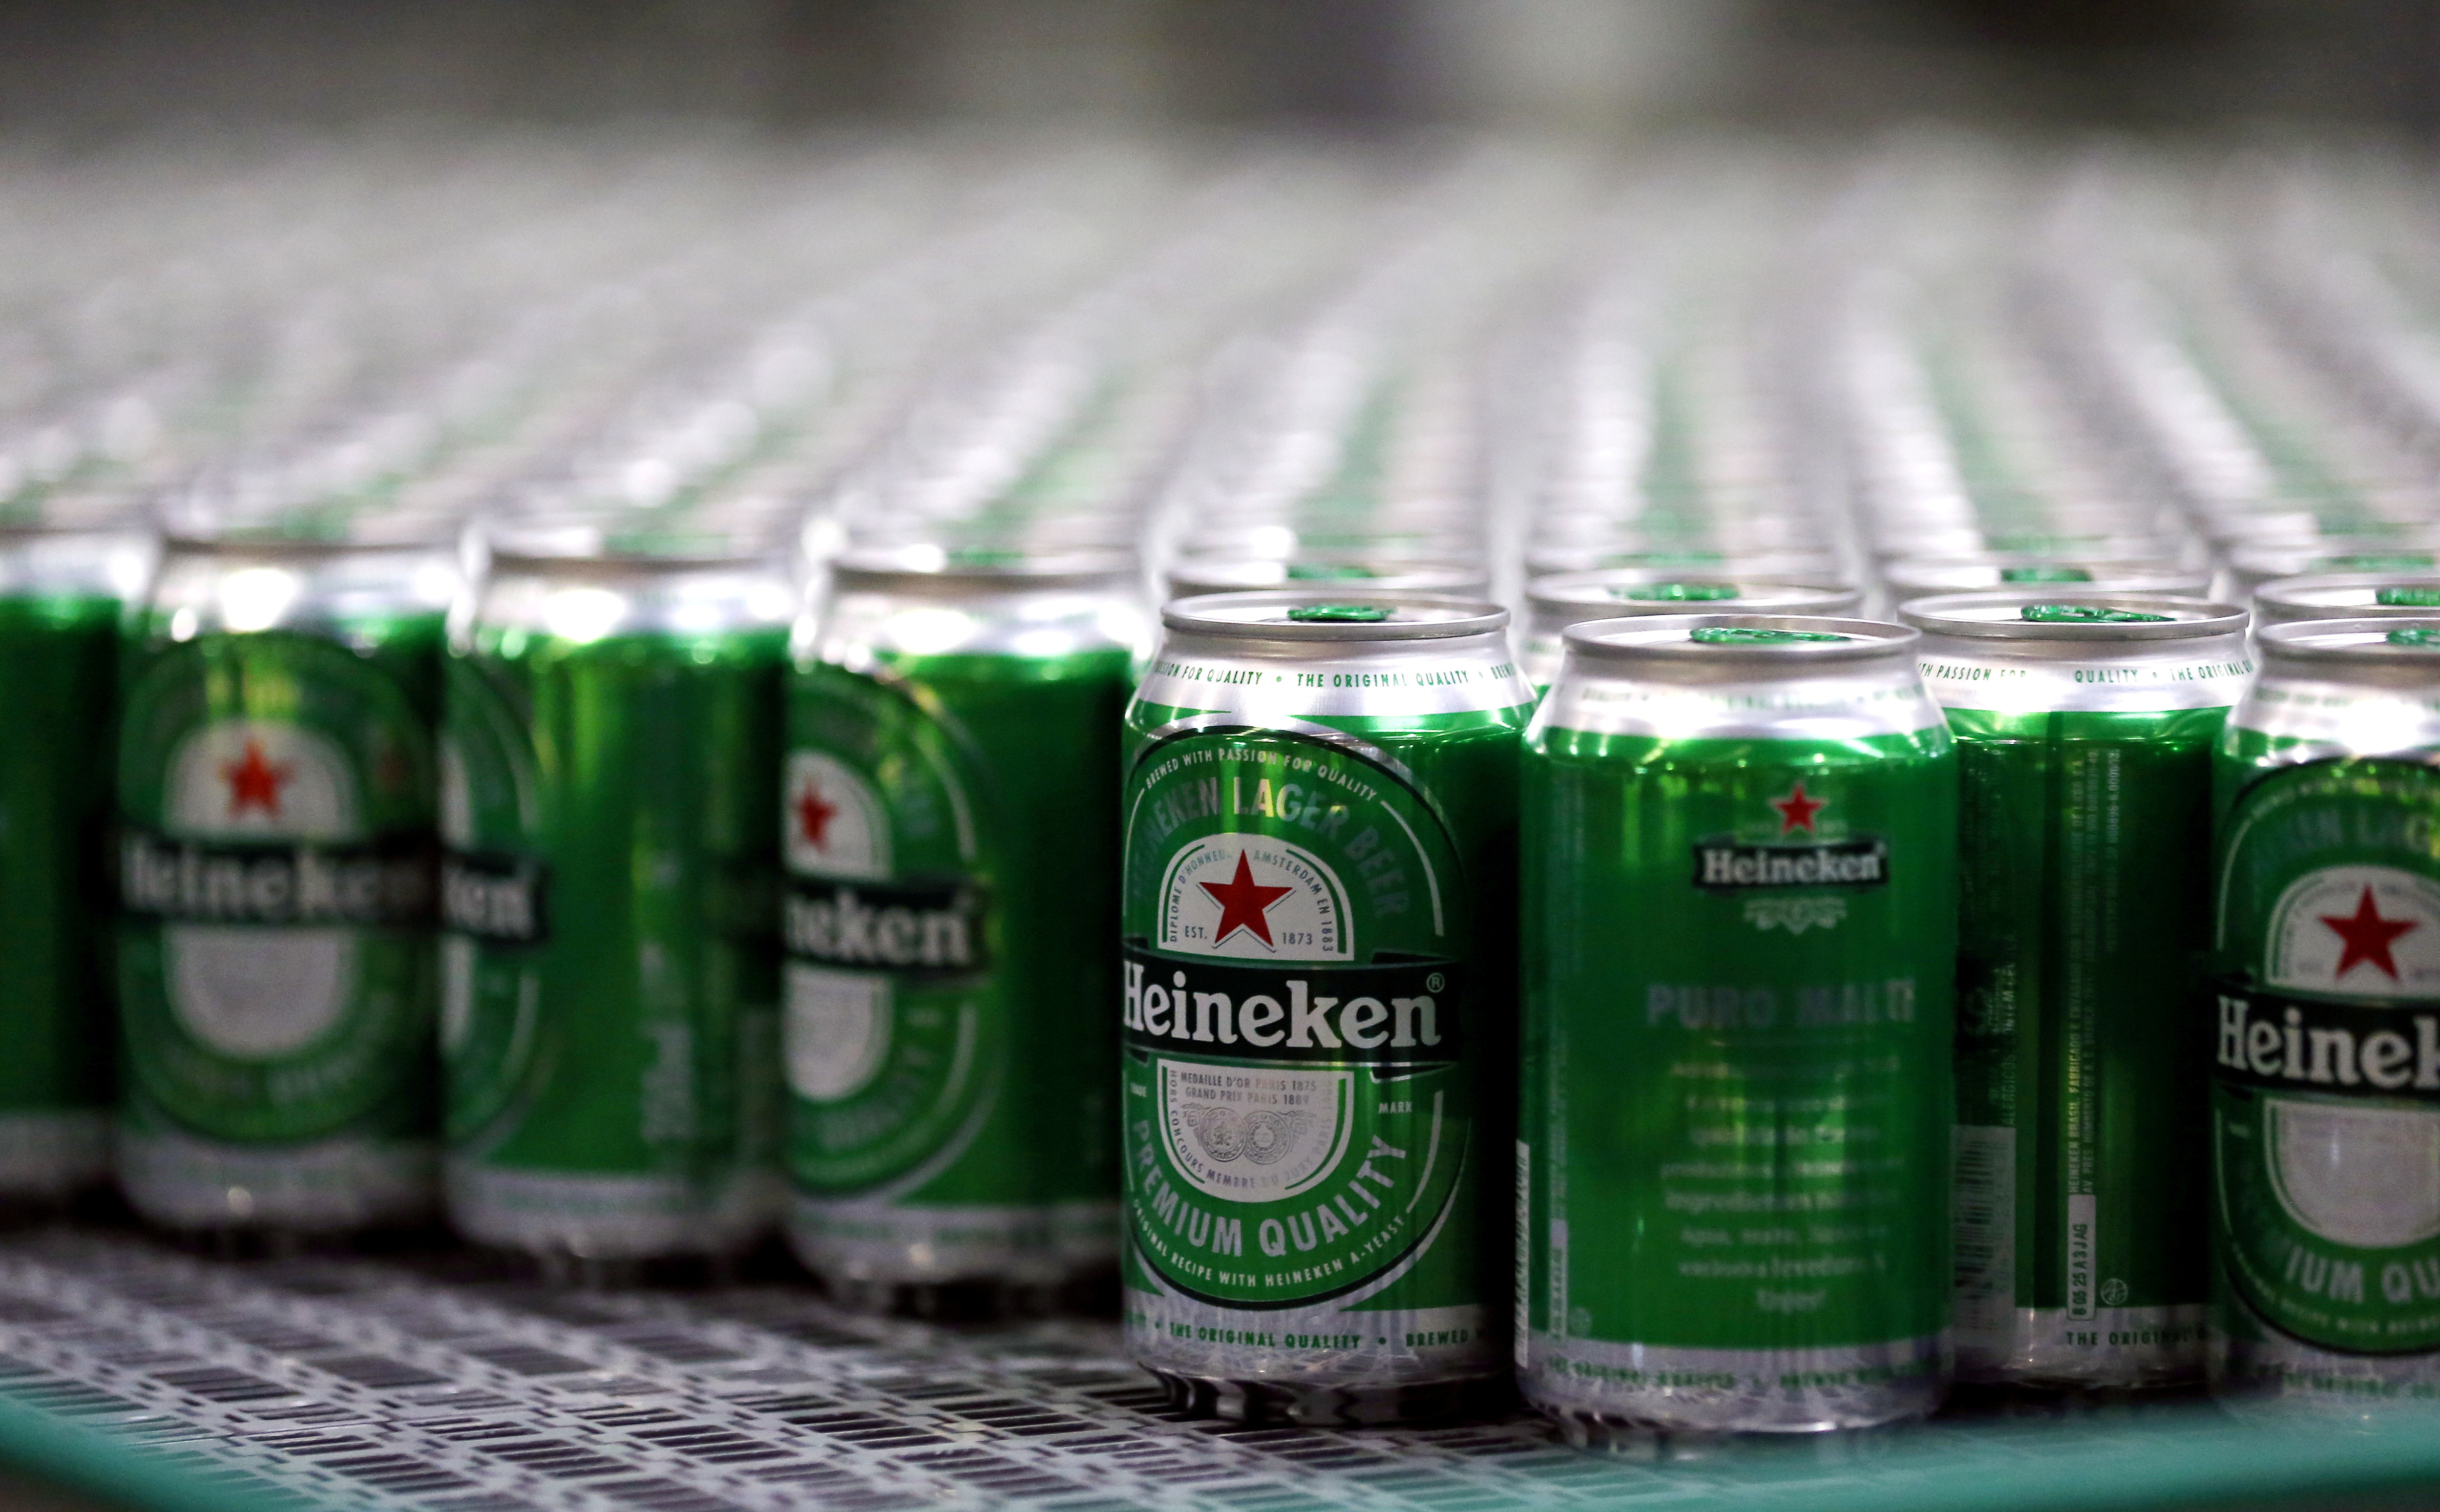 Cans of Heineken beer on a brewery production line in Brazil